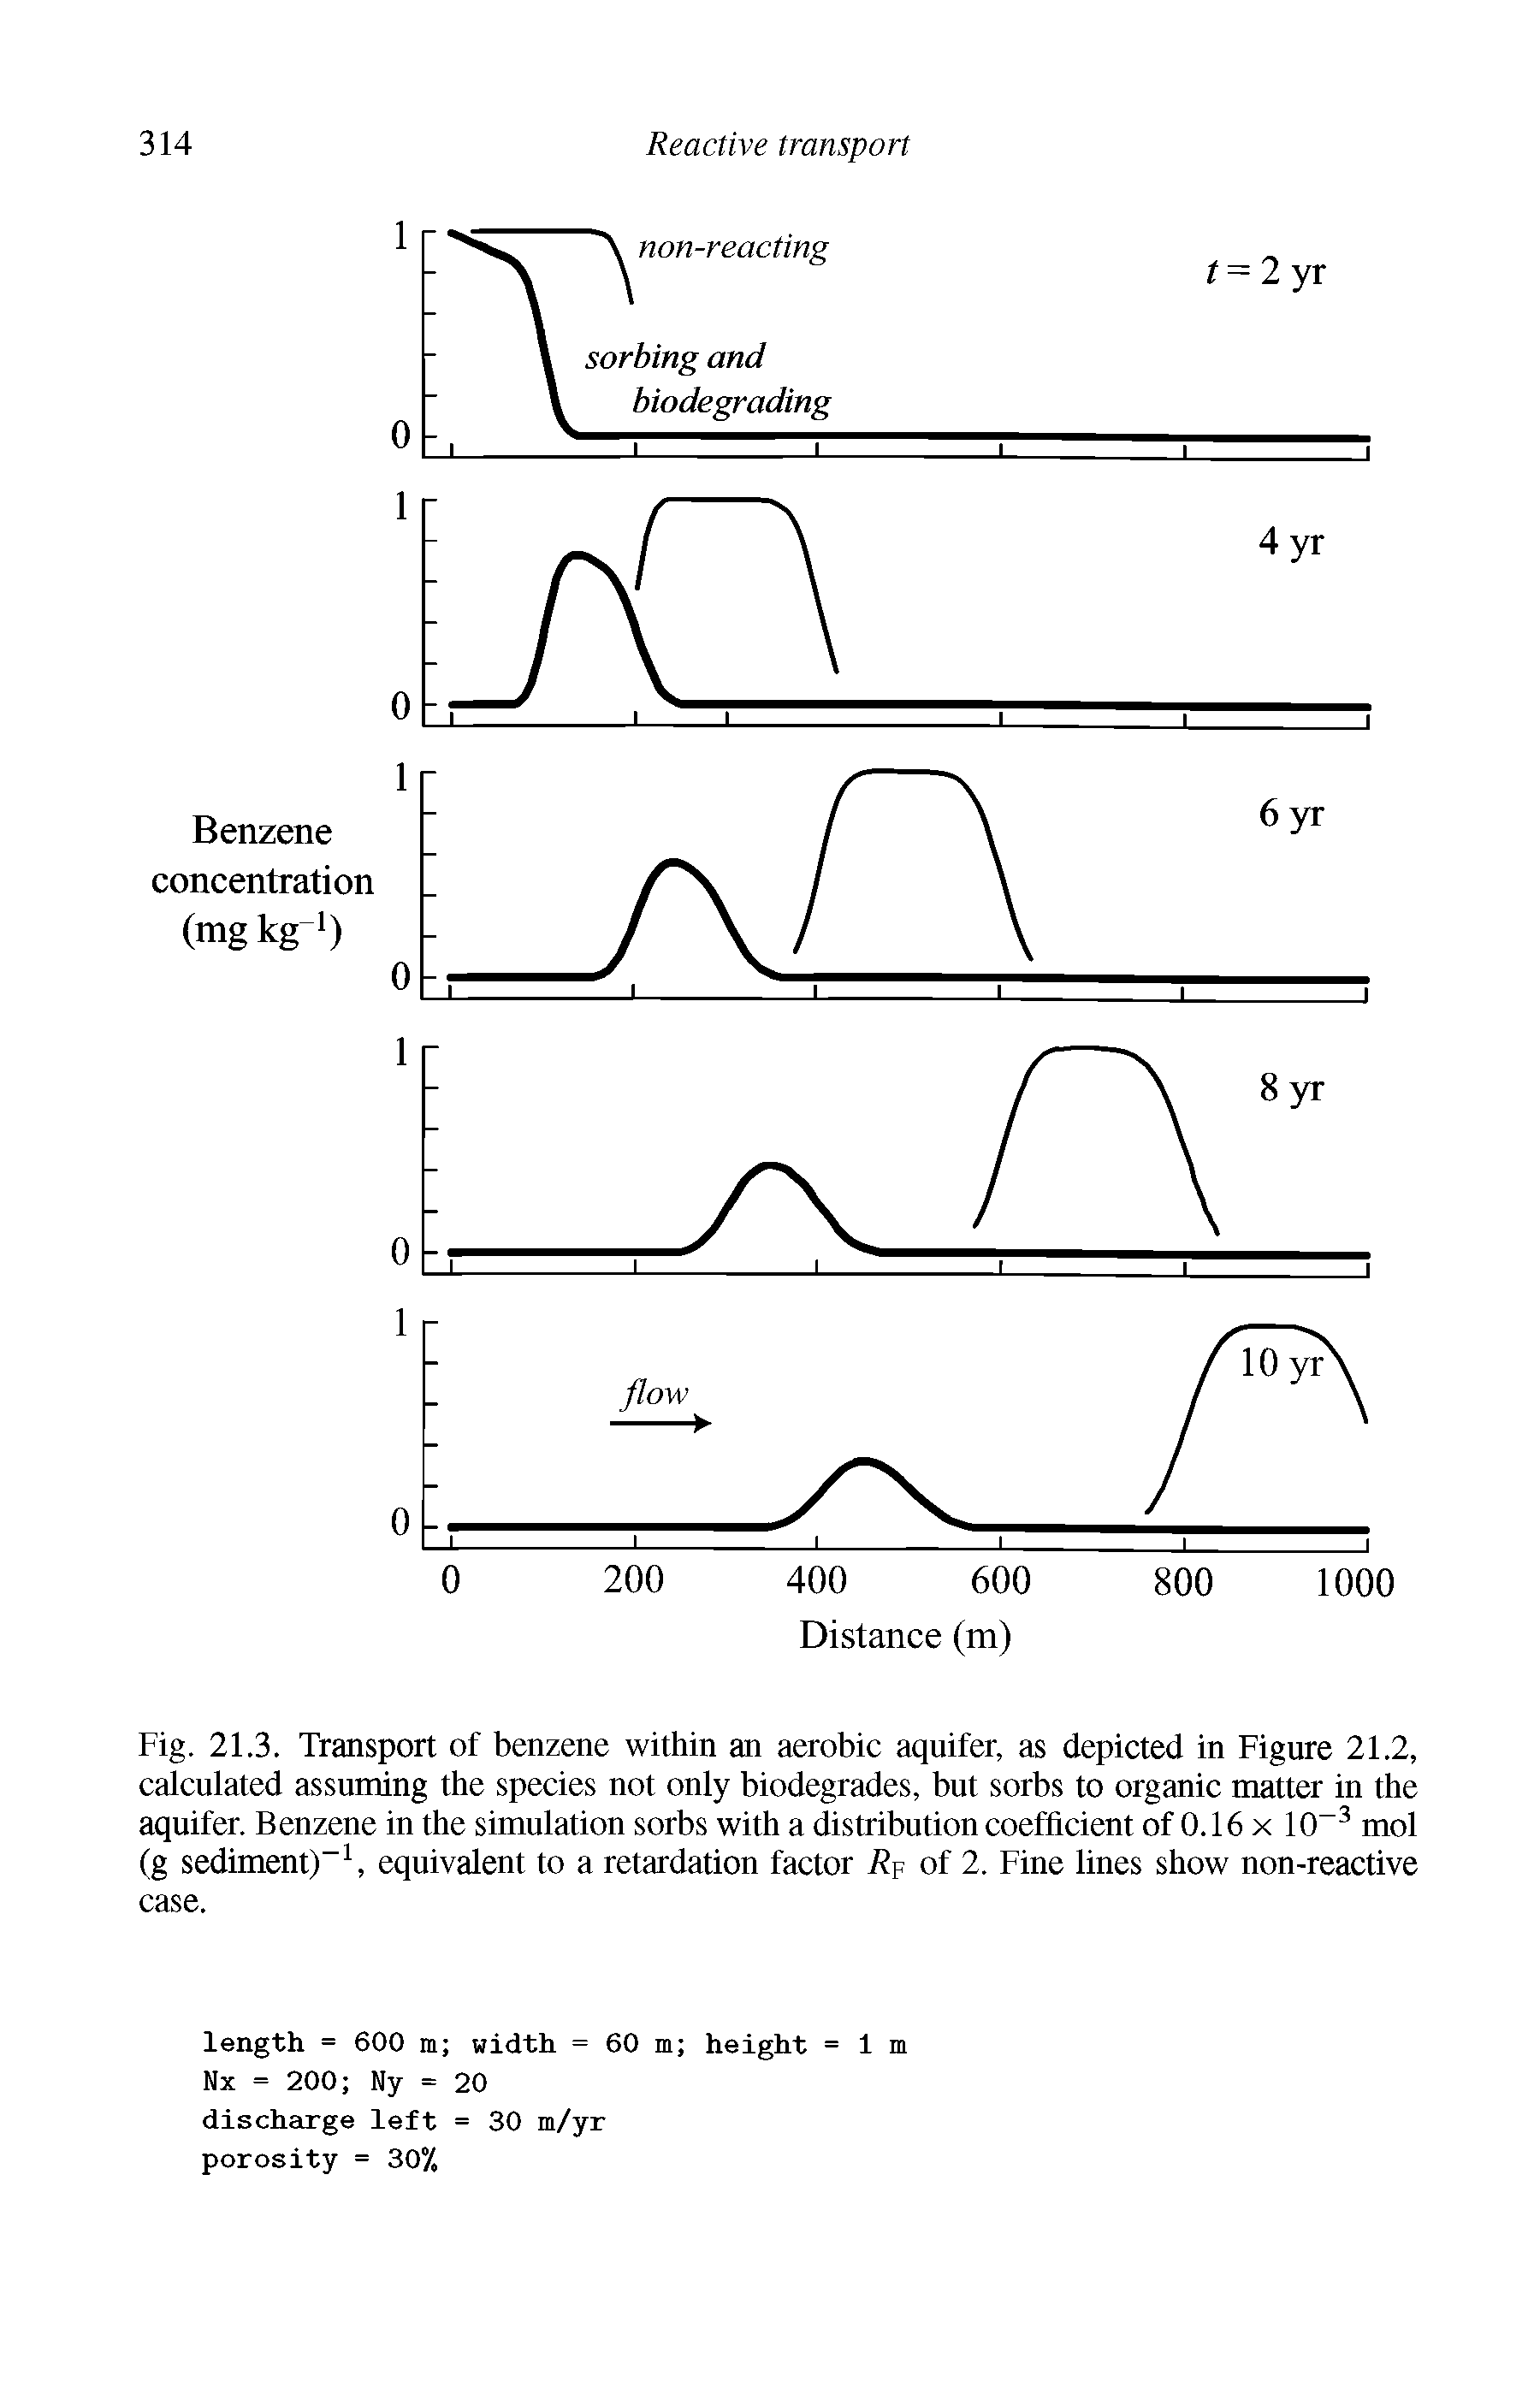 Fig. 21.3. Transport of benzene within an aerobic aquifer, as depicted in Figure 21.2, calculated assuming the species not only biodegrades, but sorbs to organic matter in the aquifer. Benzene in the simulation sorbs with a distribution coefficient of 0.16 x 10-3 mol (g sediment)-1, equivalent to a retardation factor R of 2. Fine lines show non-reactive case.